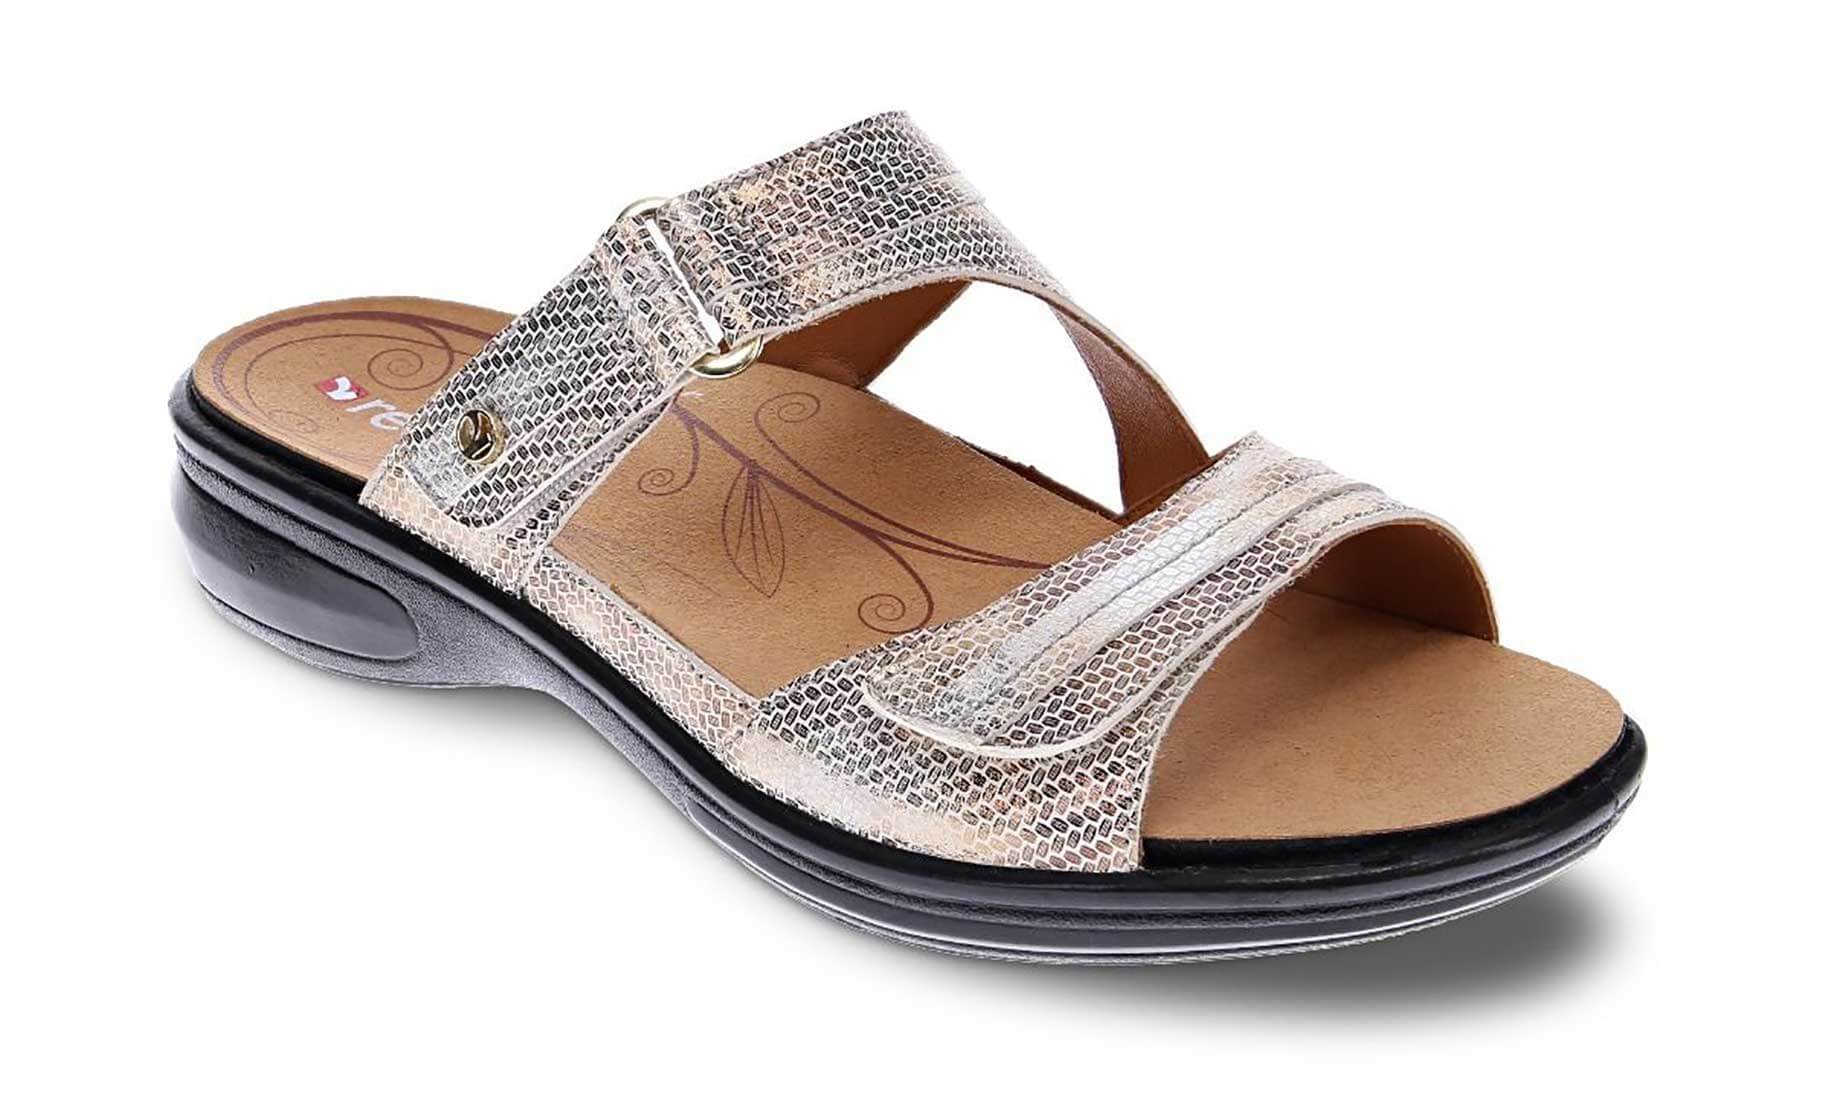 Revere Rio - Women's Sandal - Medium - Wide - Extra Depth With Removable Foot Beds